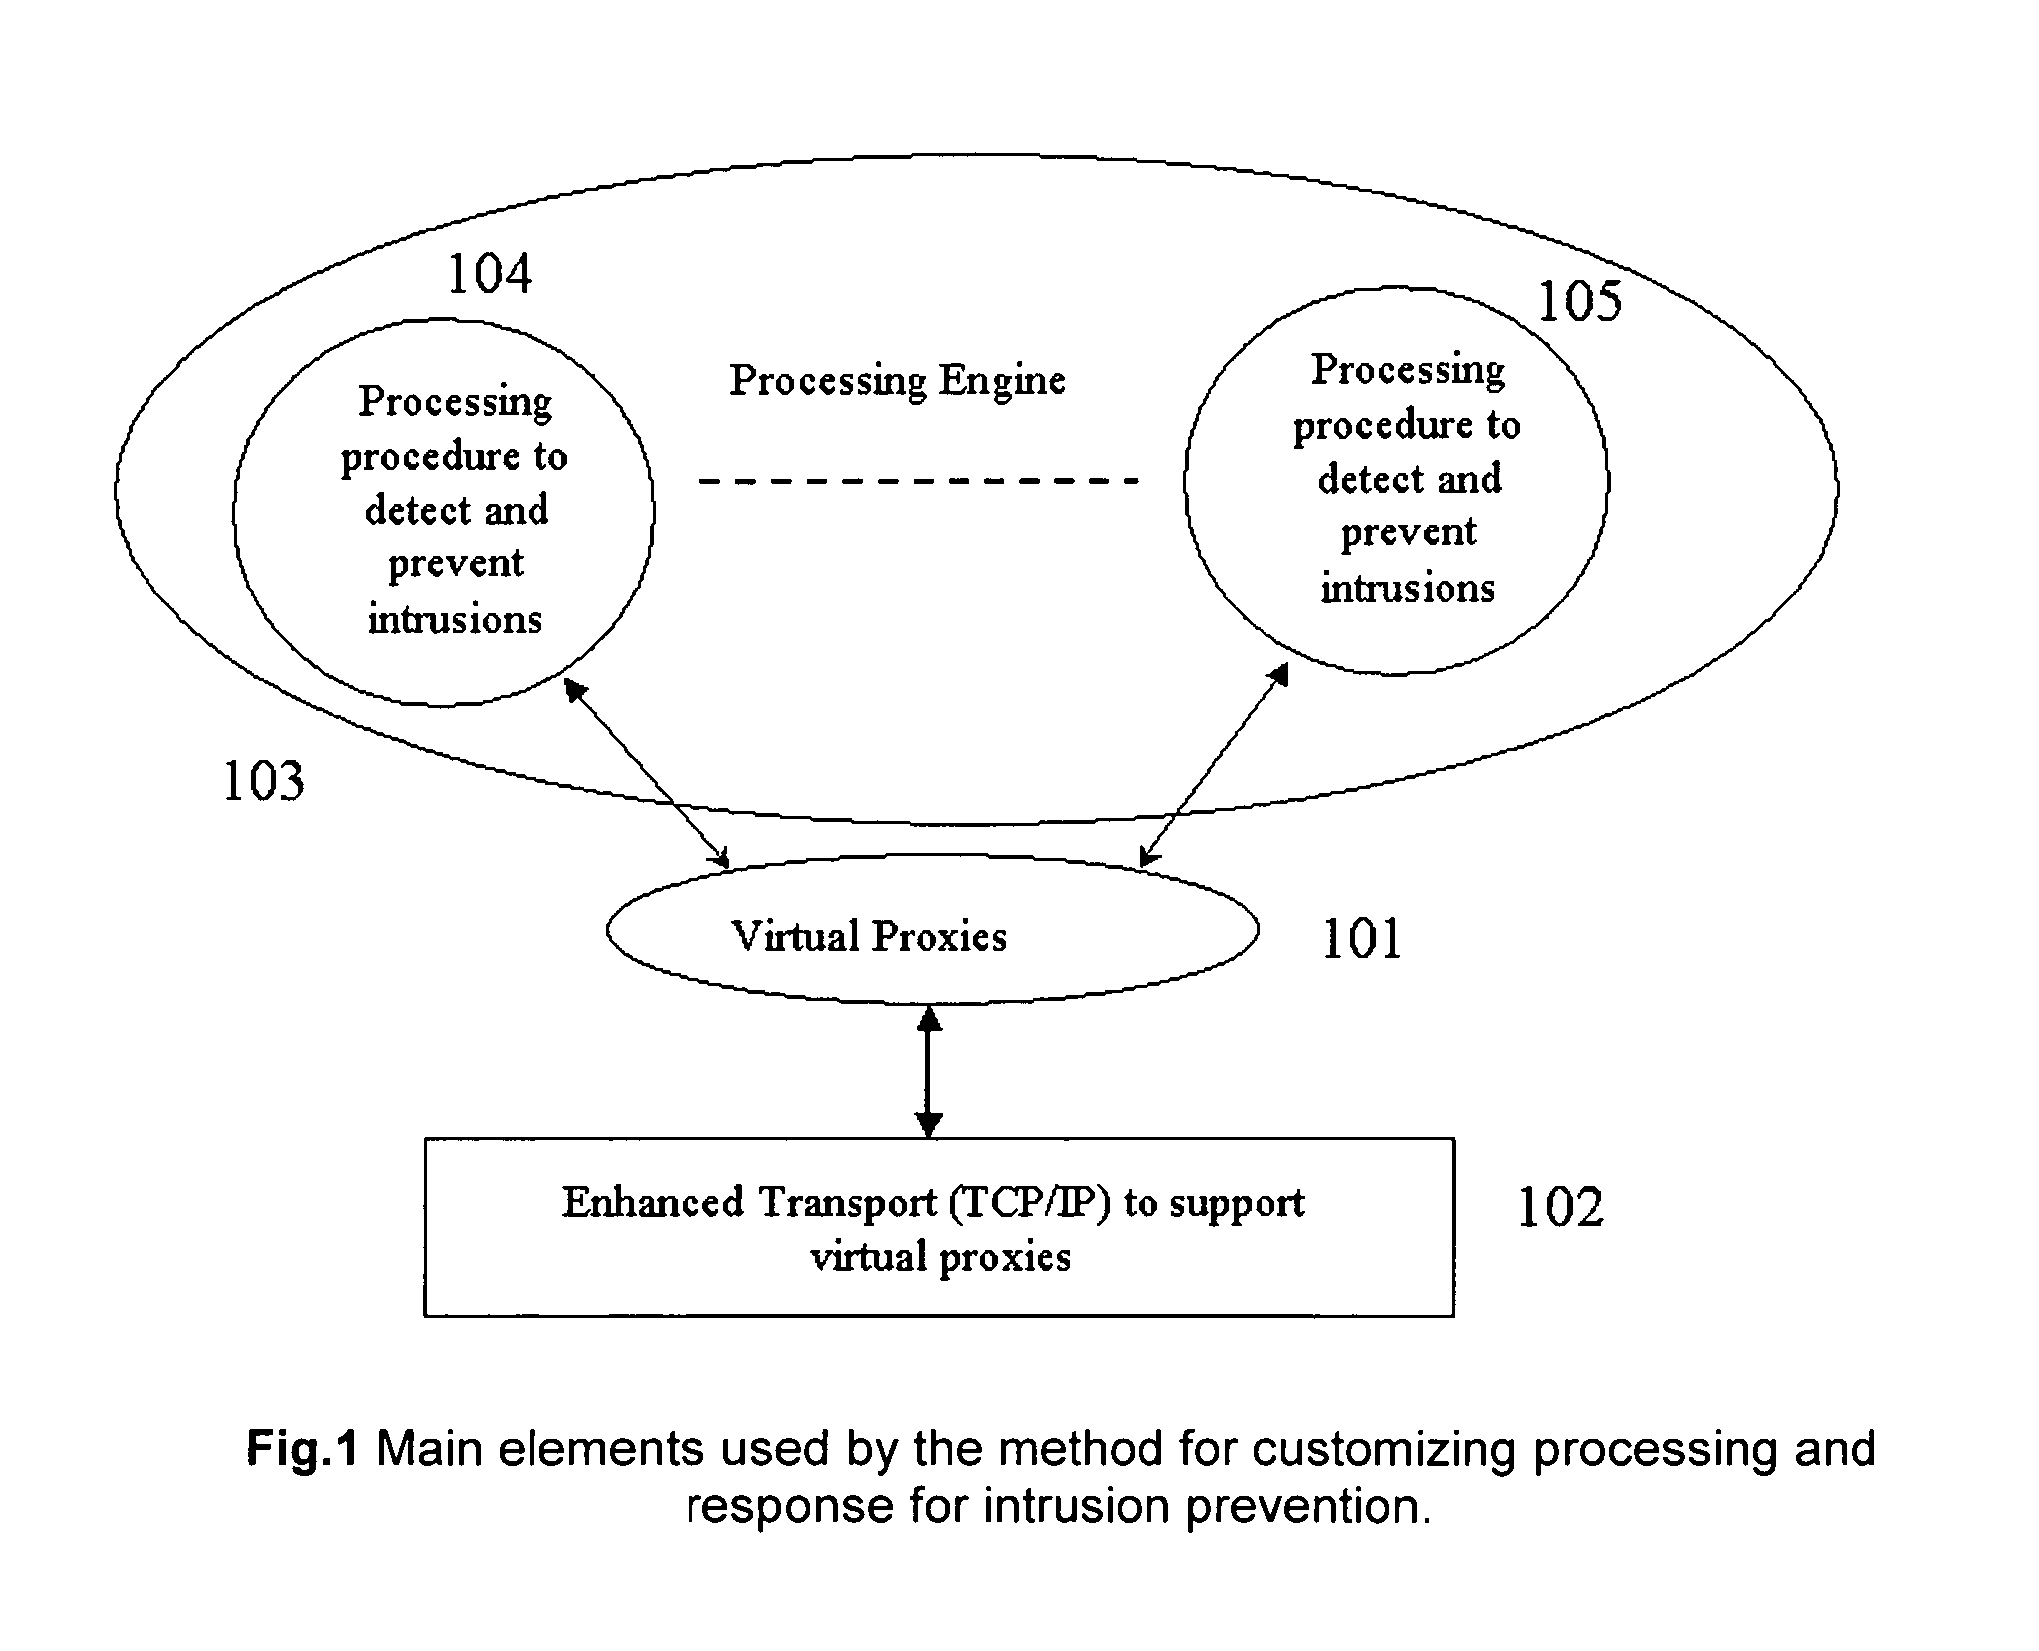 Method for customizing processing and response for intrusion prevention